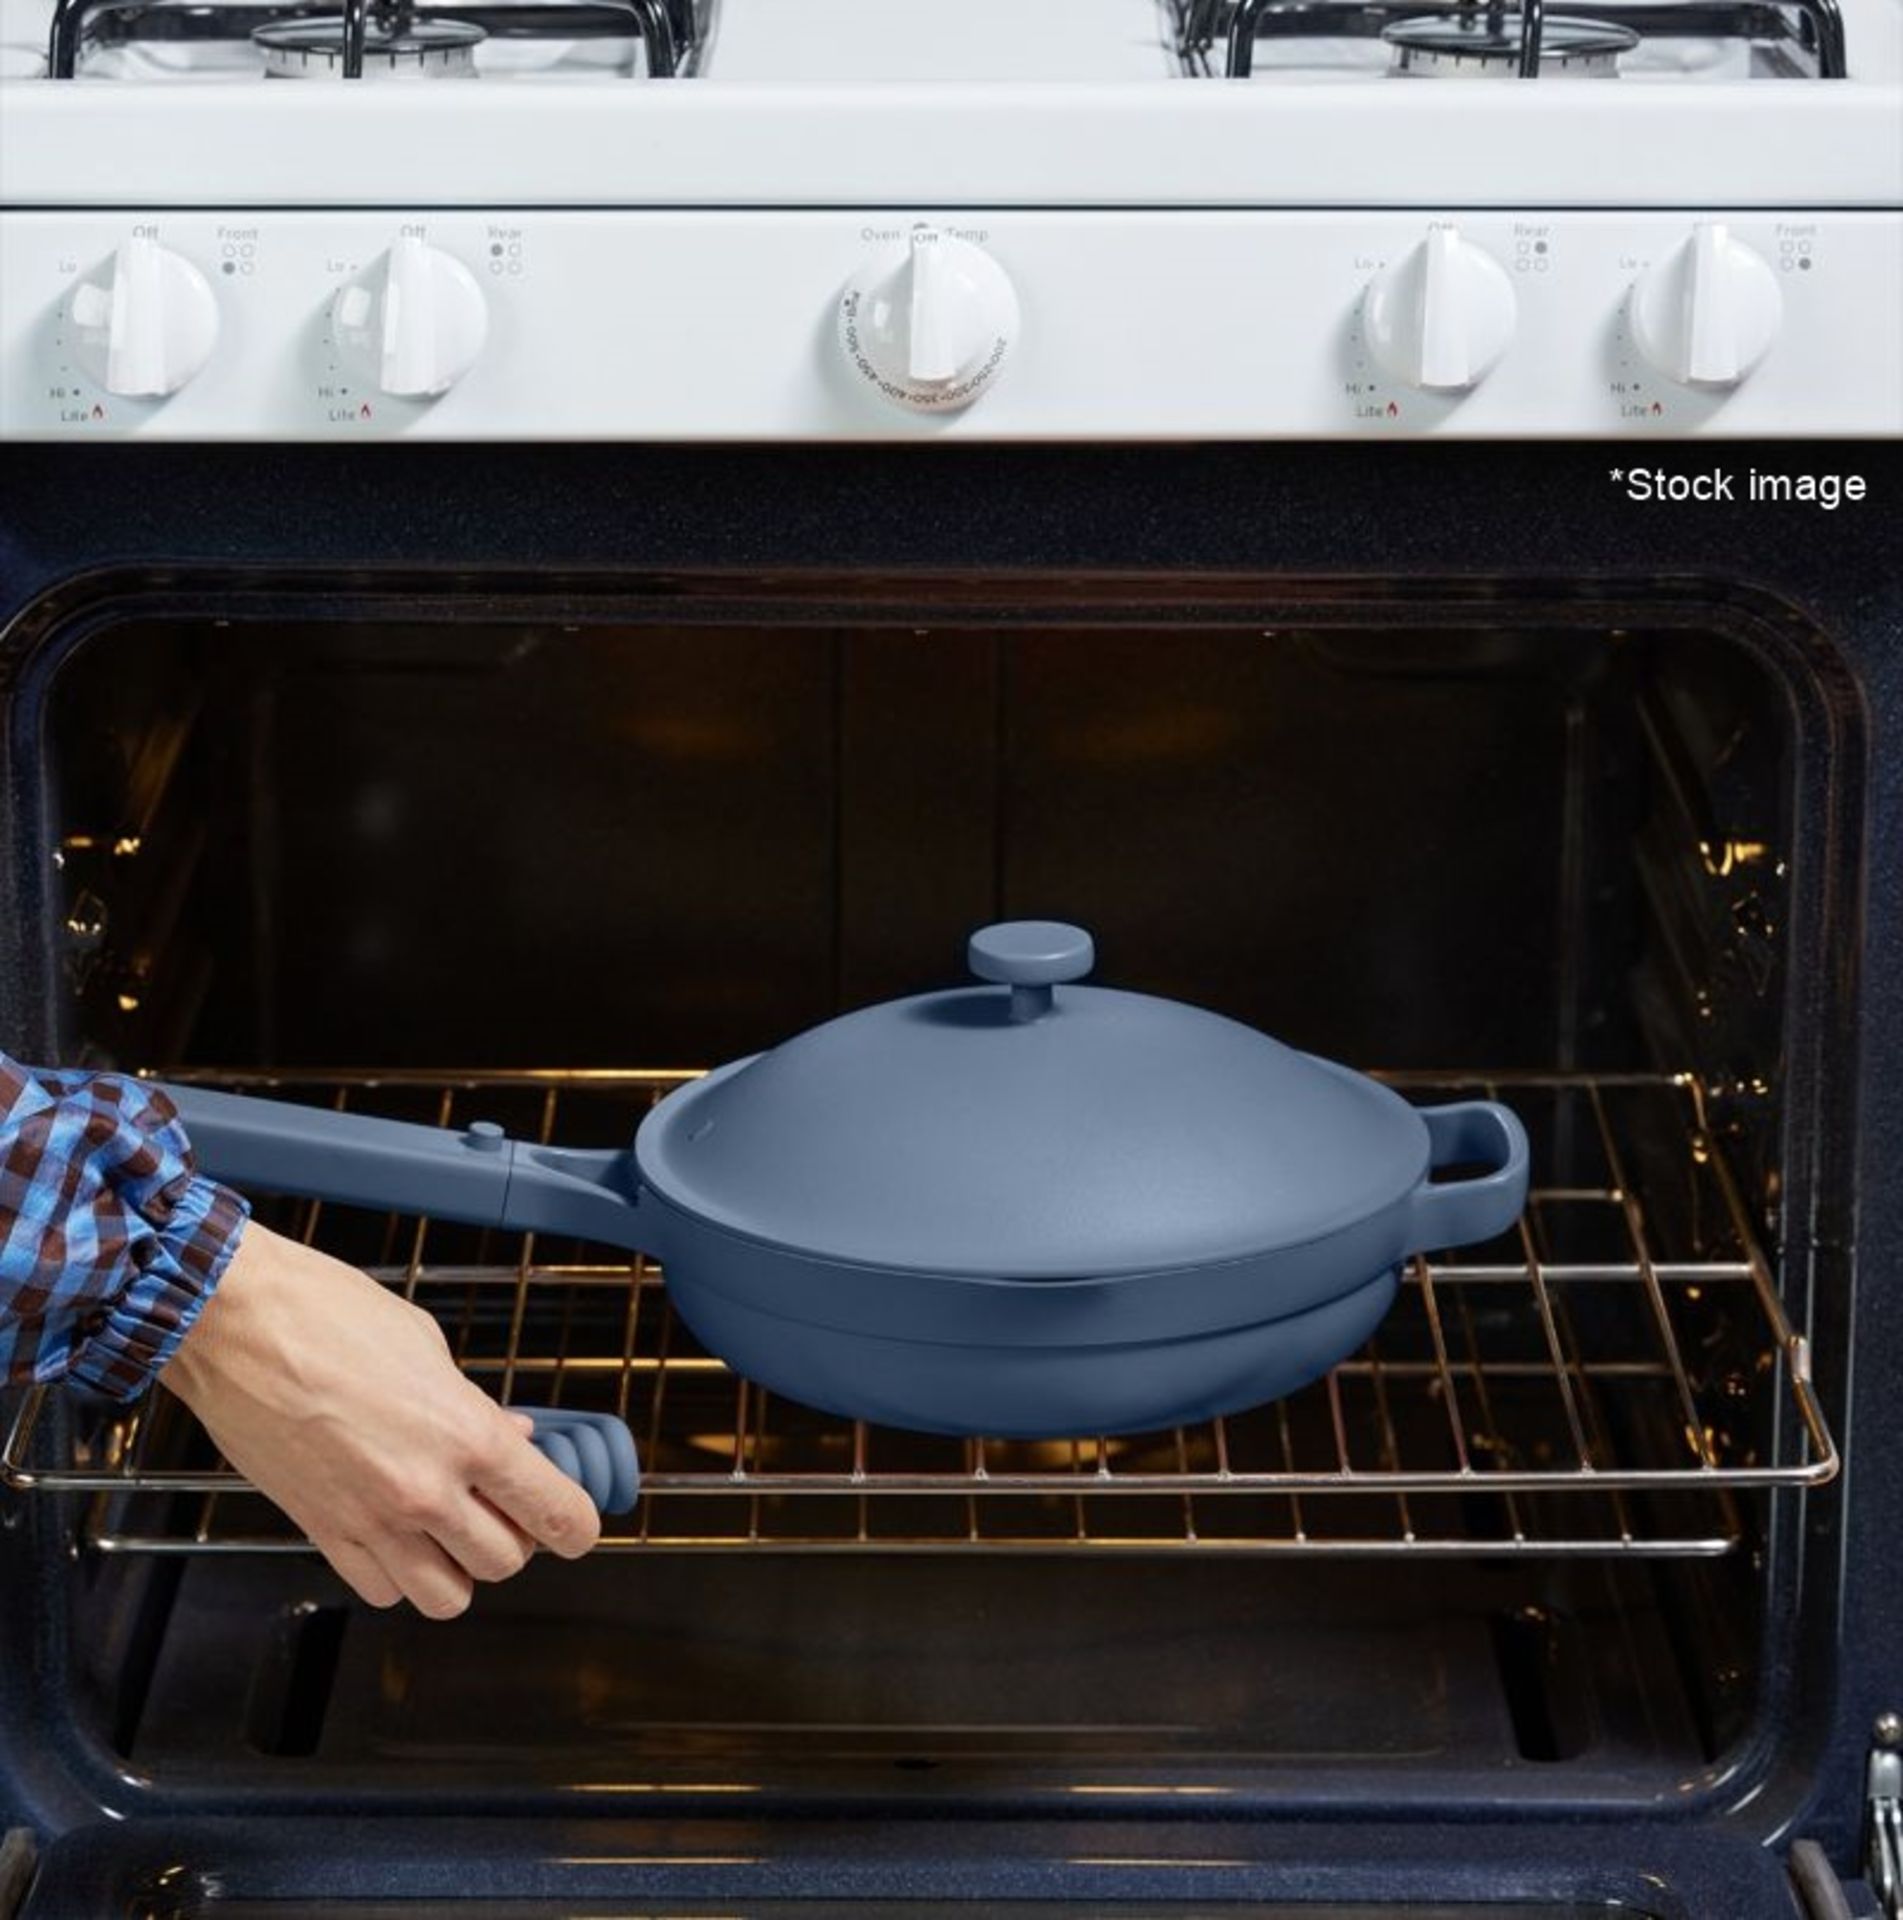 1 x OUR PLACE Always Pan Set with Steel Steamer, in Blue (26.5cm) - Original Price £155.00 - Image 2 of 14